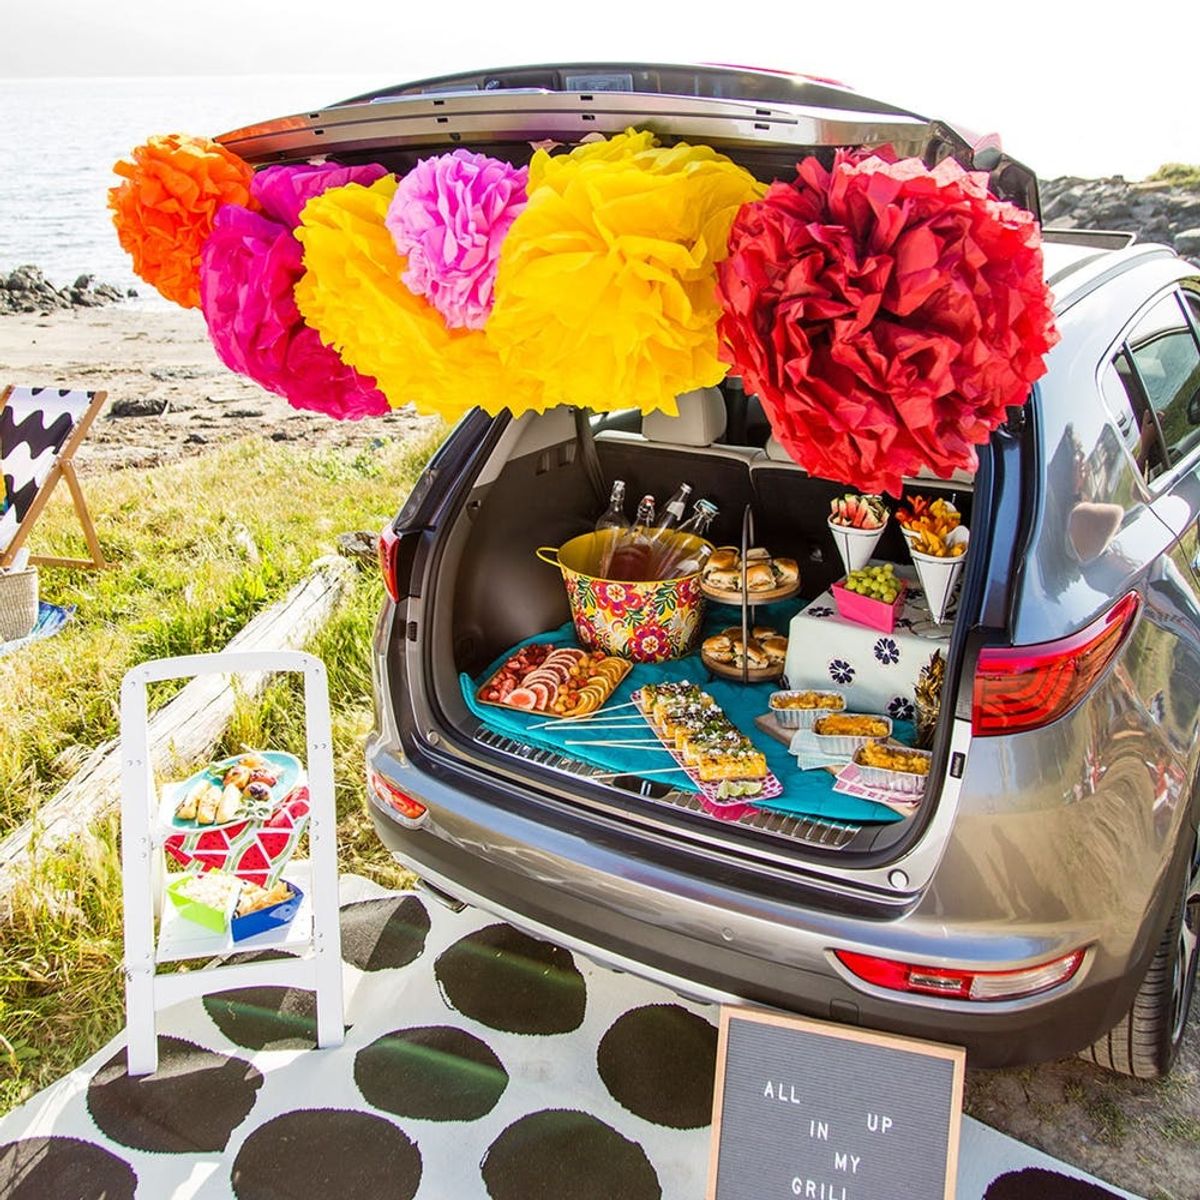 Here’s How to Throw a Beach BBQ Out of the Back of Your Trunk